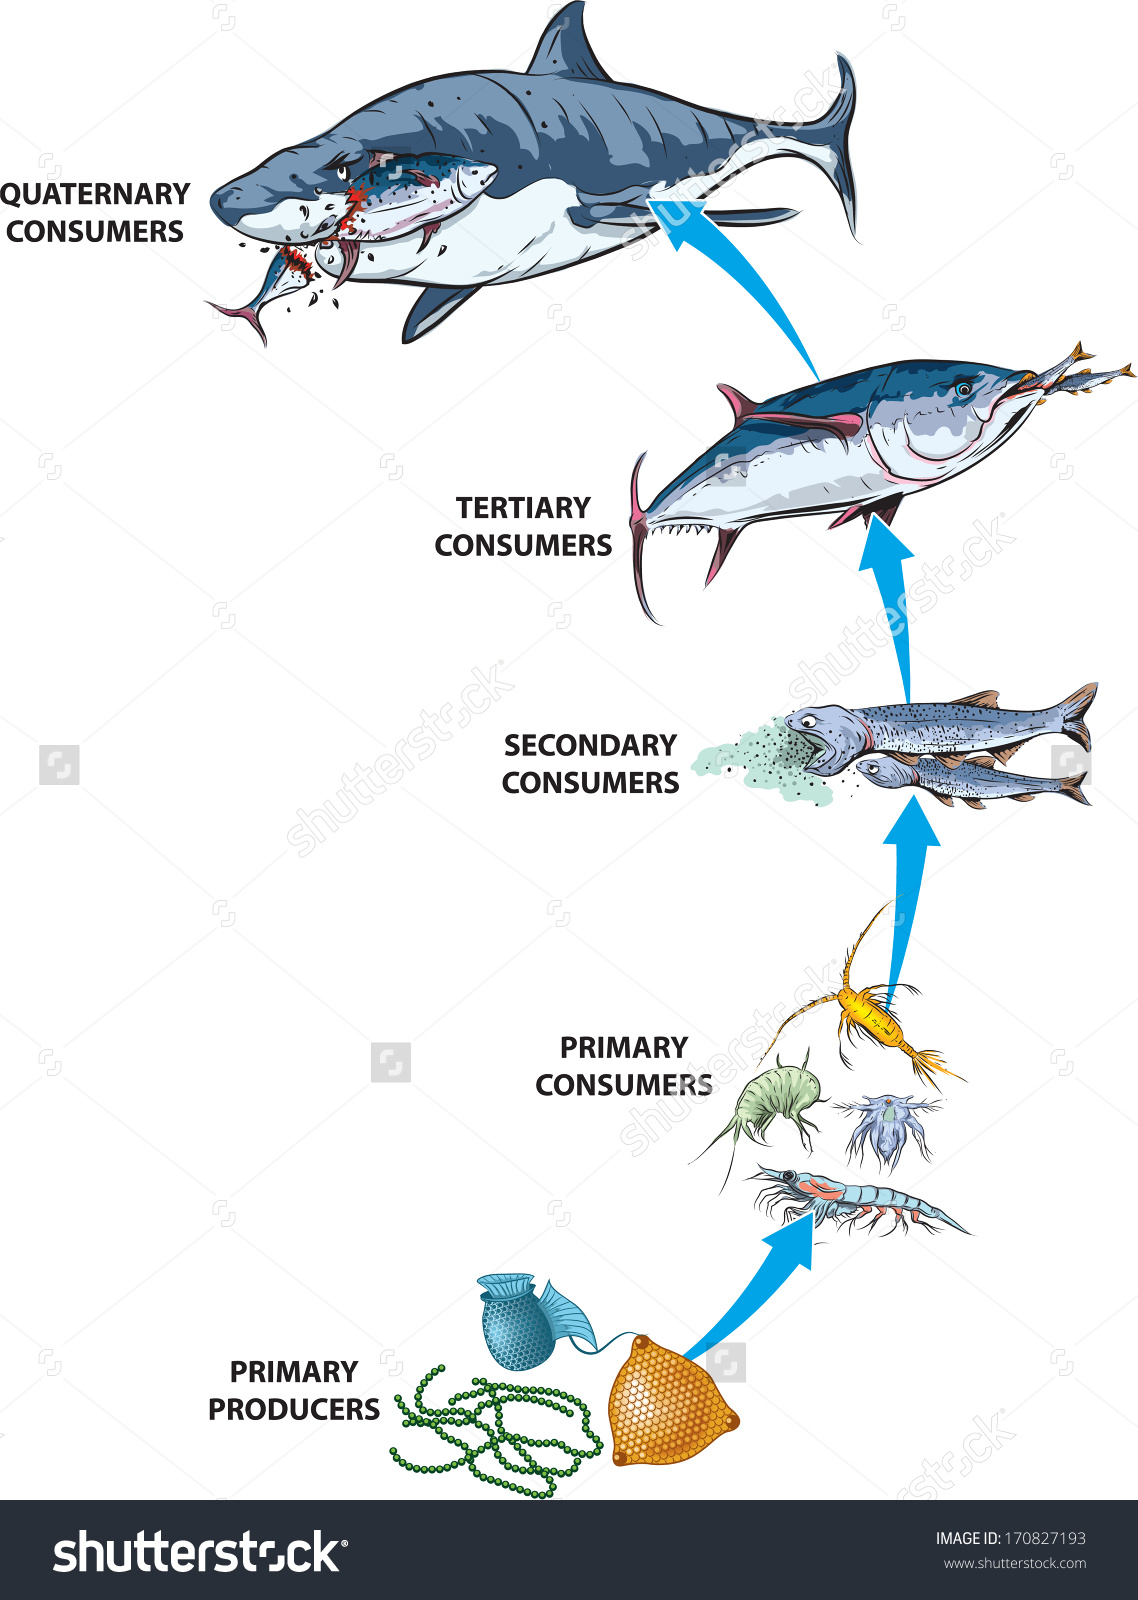 food chain clipart black and white - Clipground